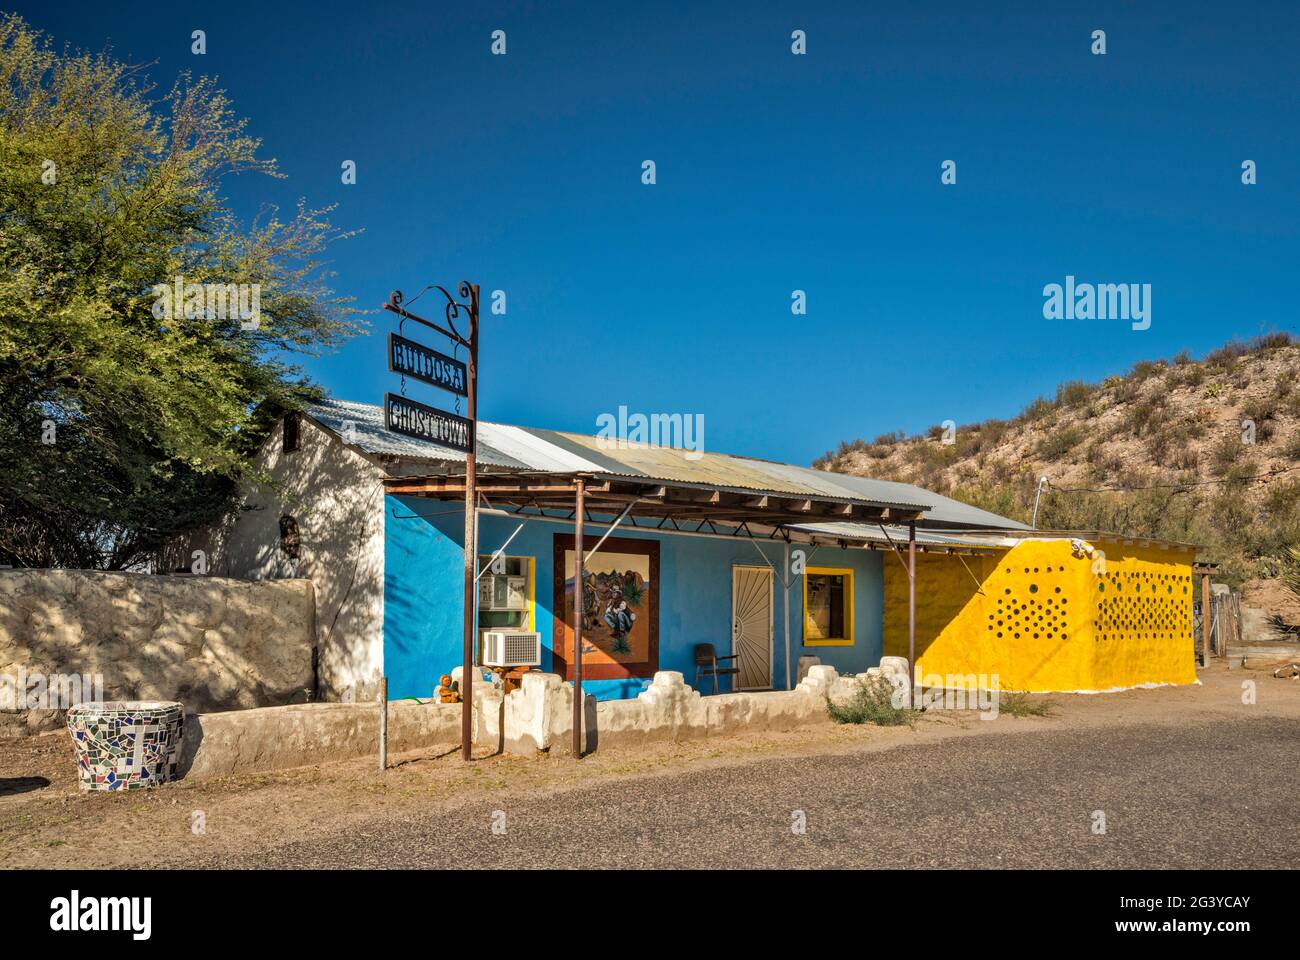 Shop in village of Ruidosa, Big Bend Country, Texas, USA Stock Photo